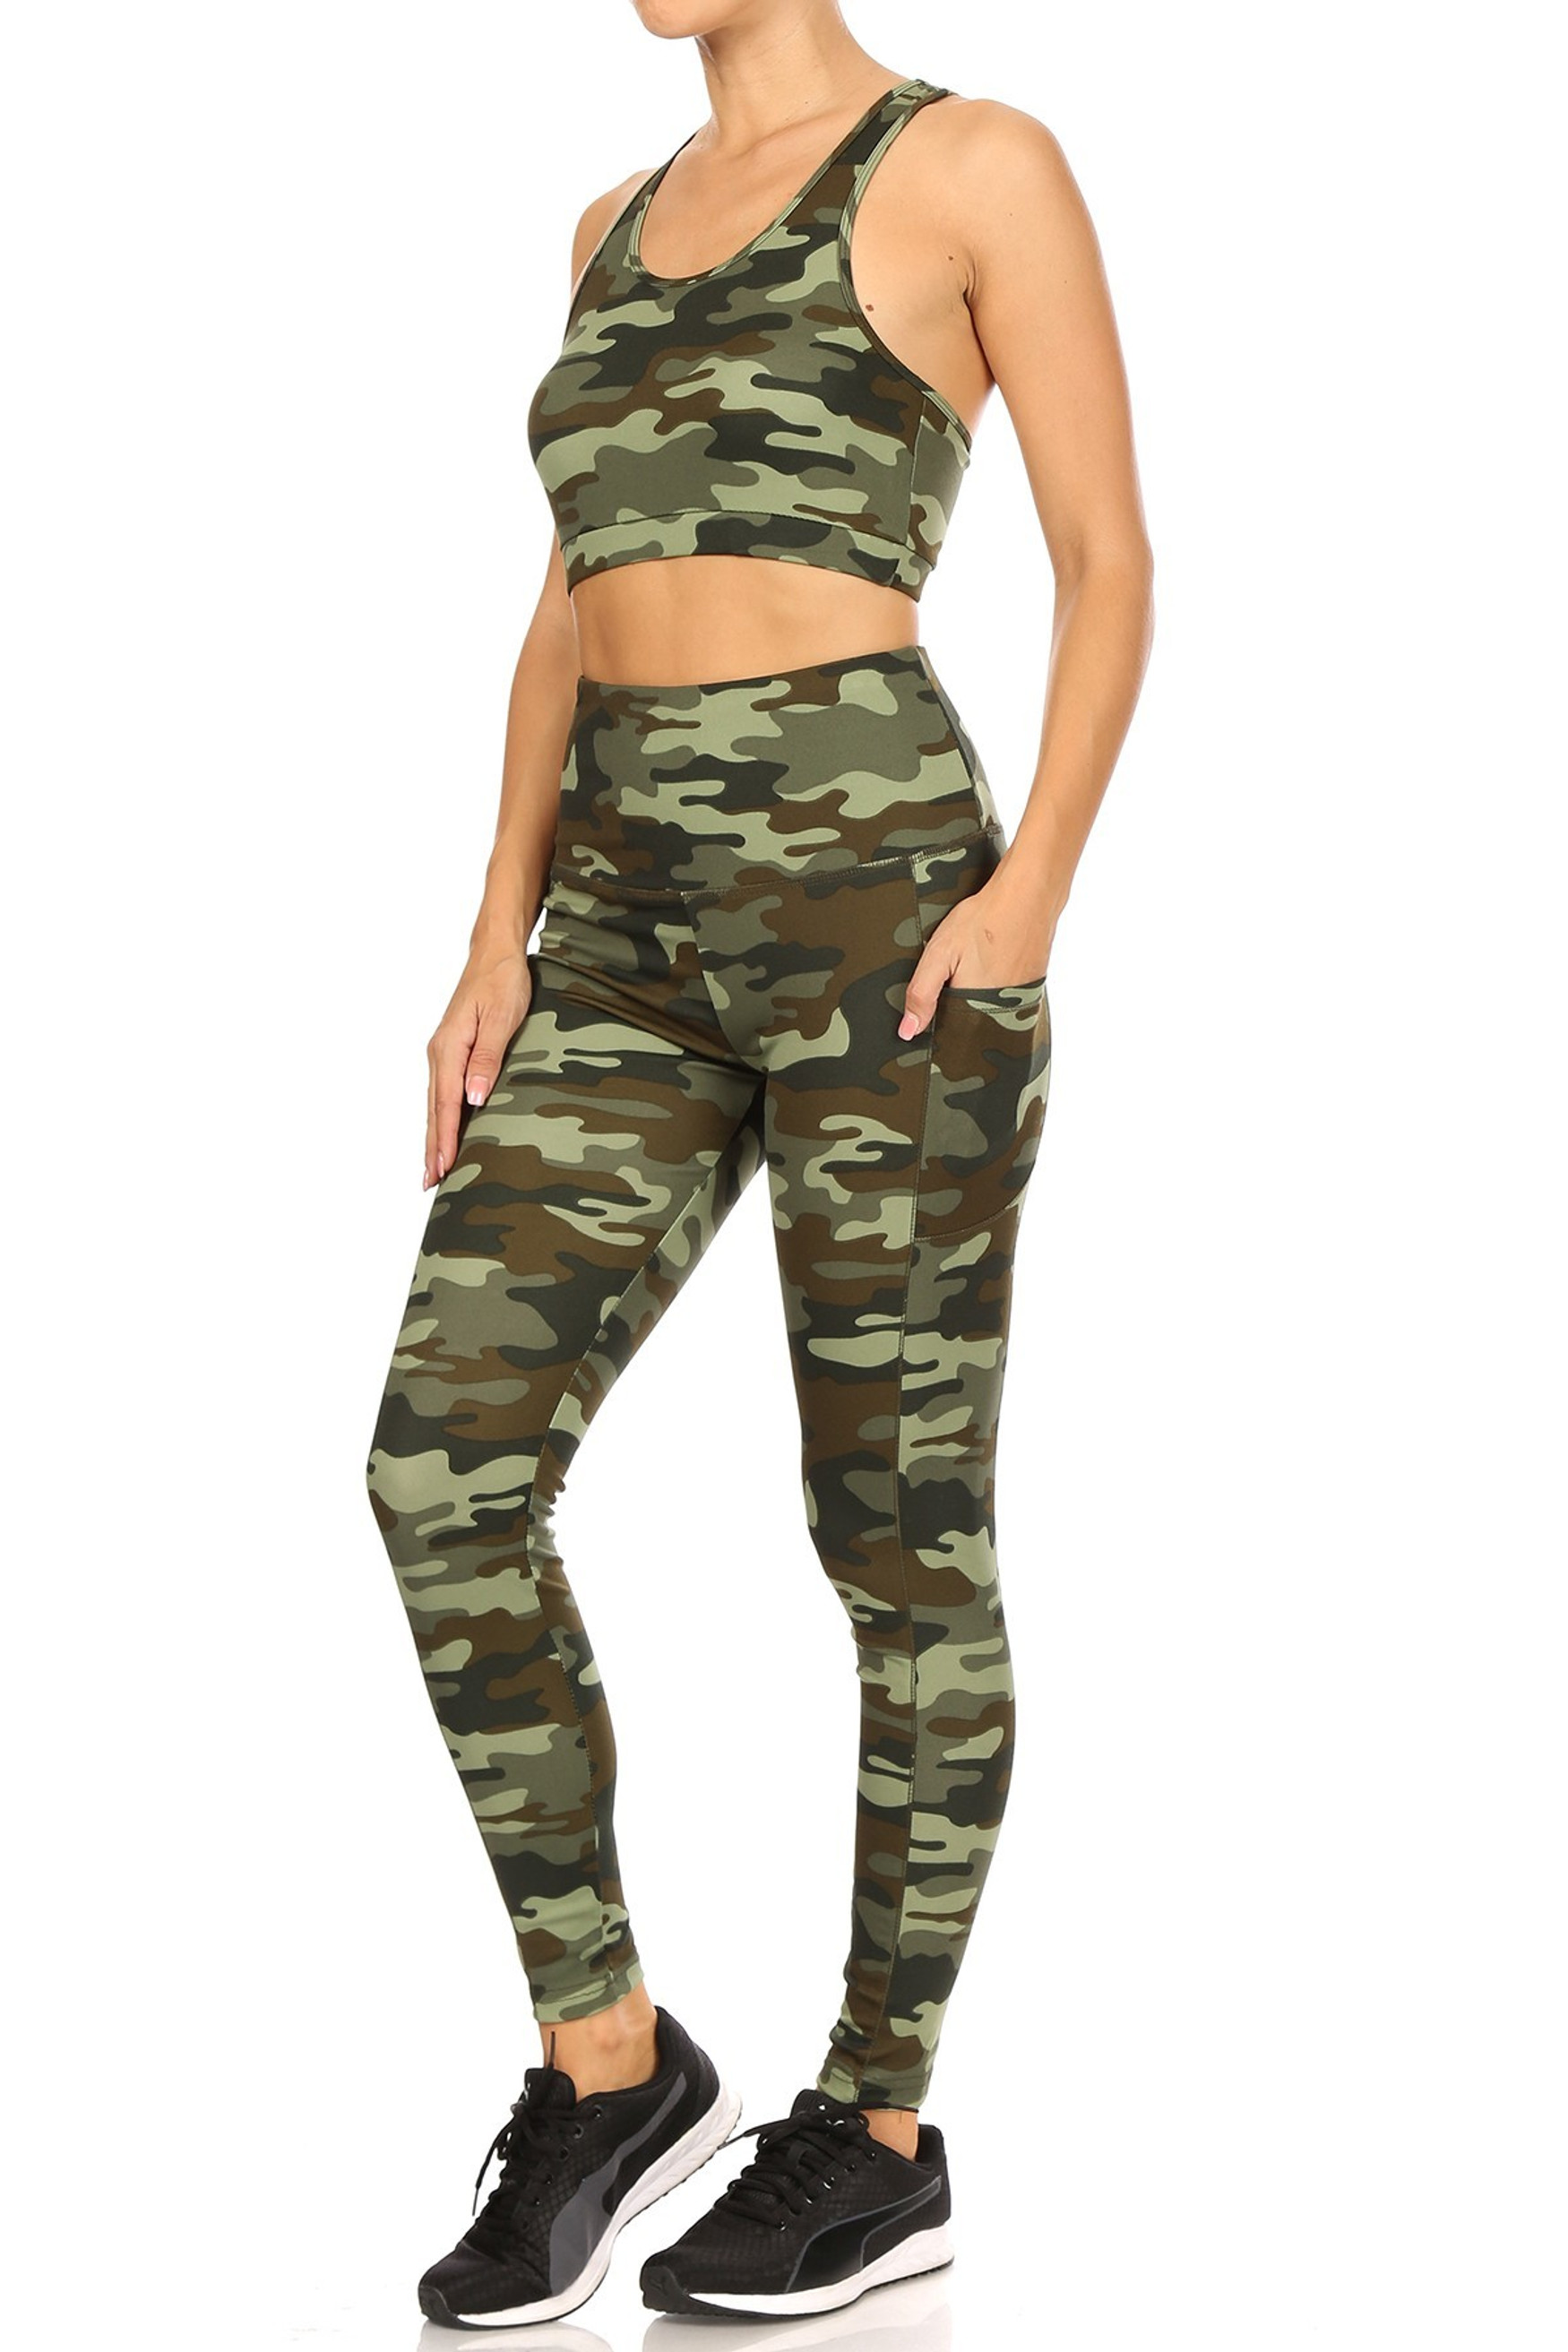 2 Piece Green Camouflage Crop Top and Legging Set